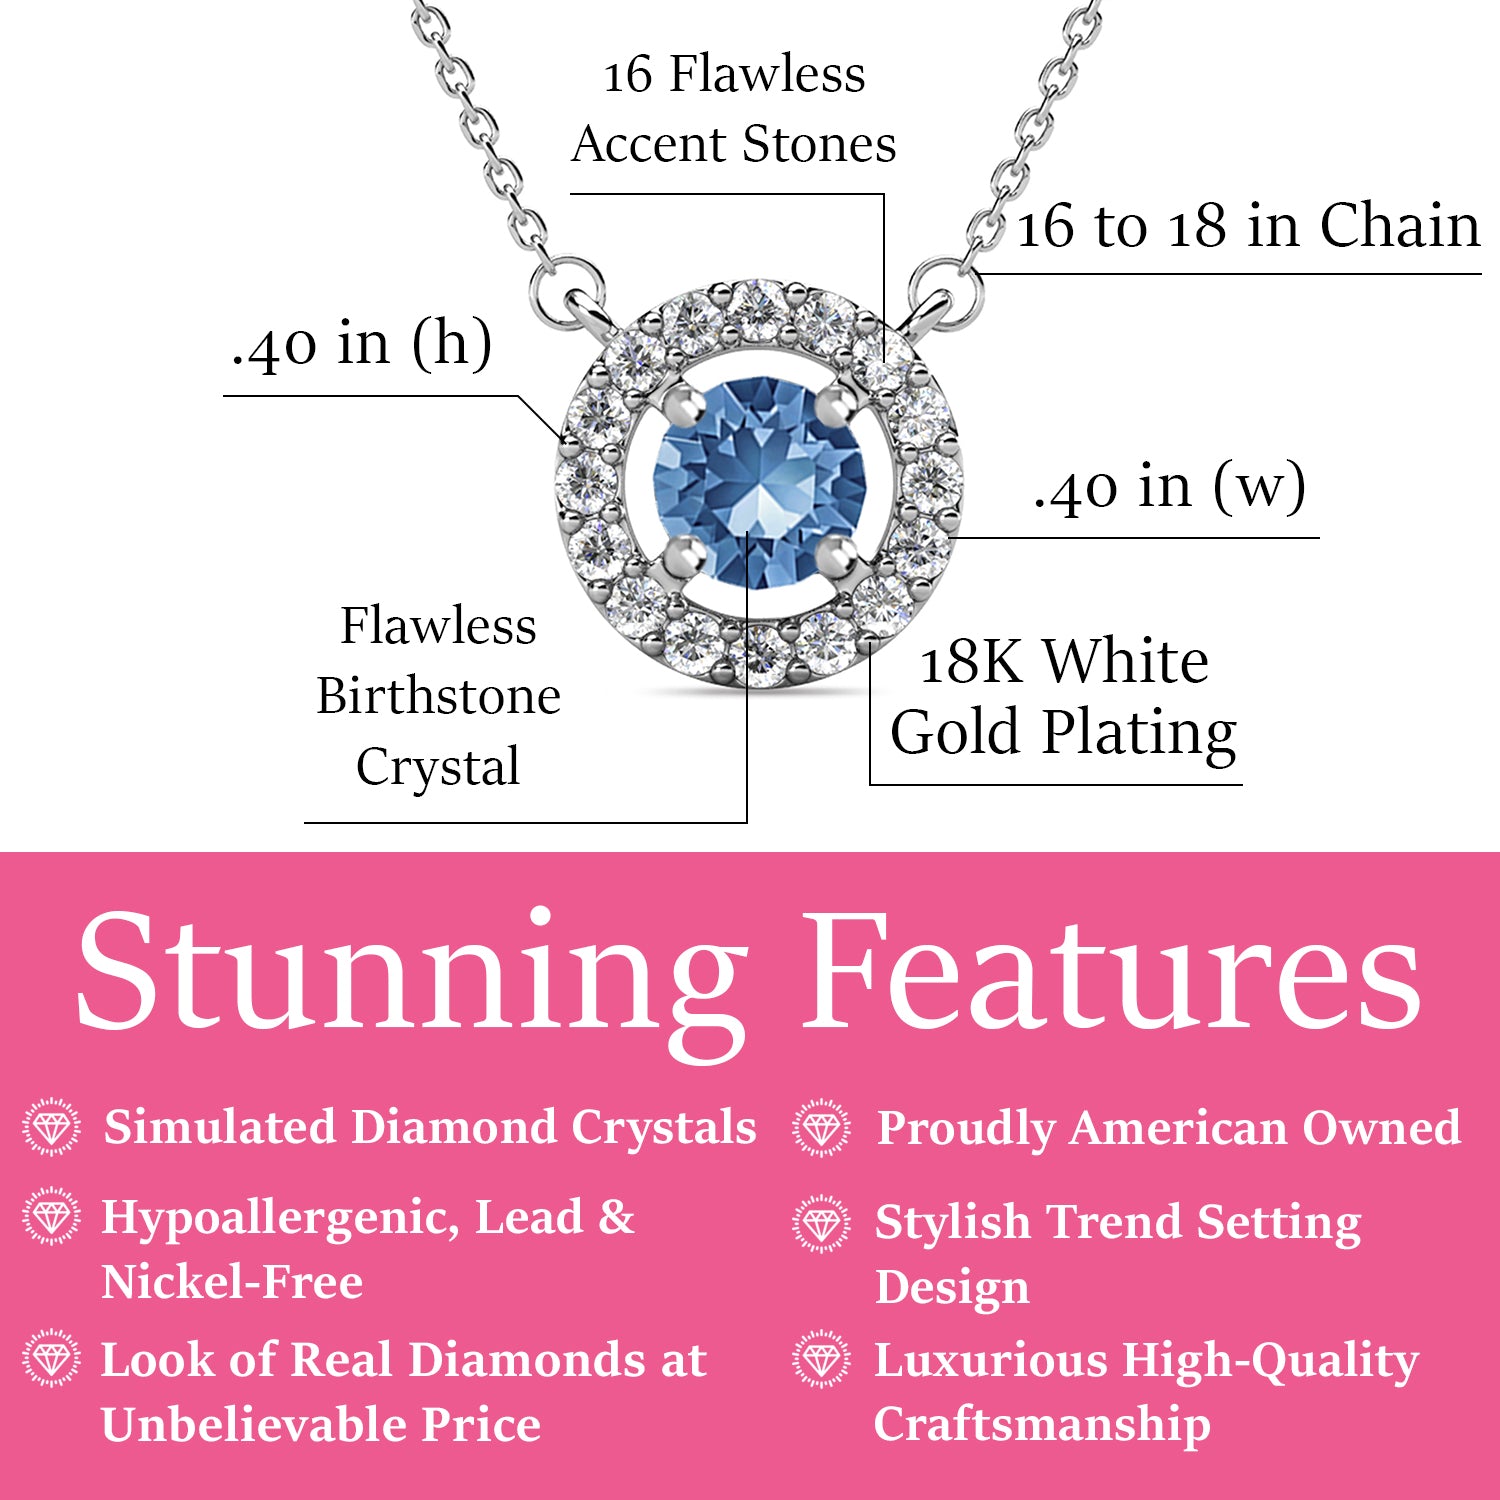 Royal December Birthstone Blue Topaz Necklace, 18k White Gold Plated Silver Halo Necklace with Round Cut Crystal